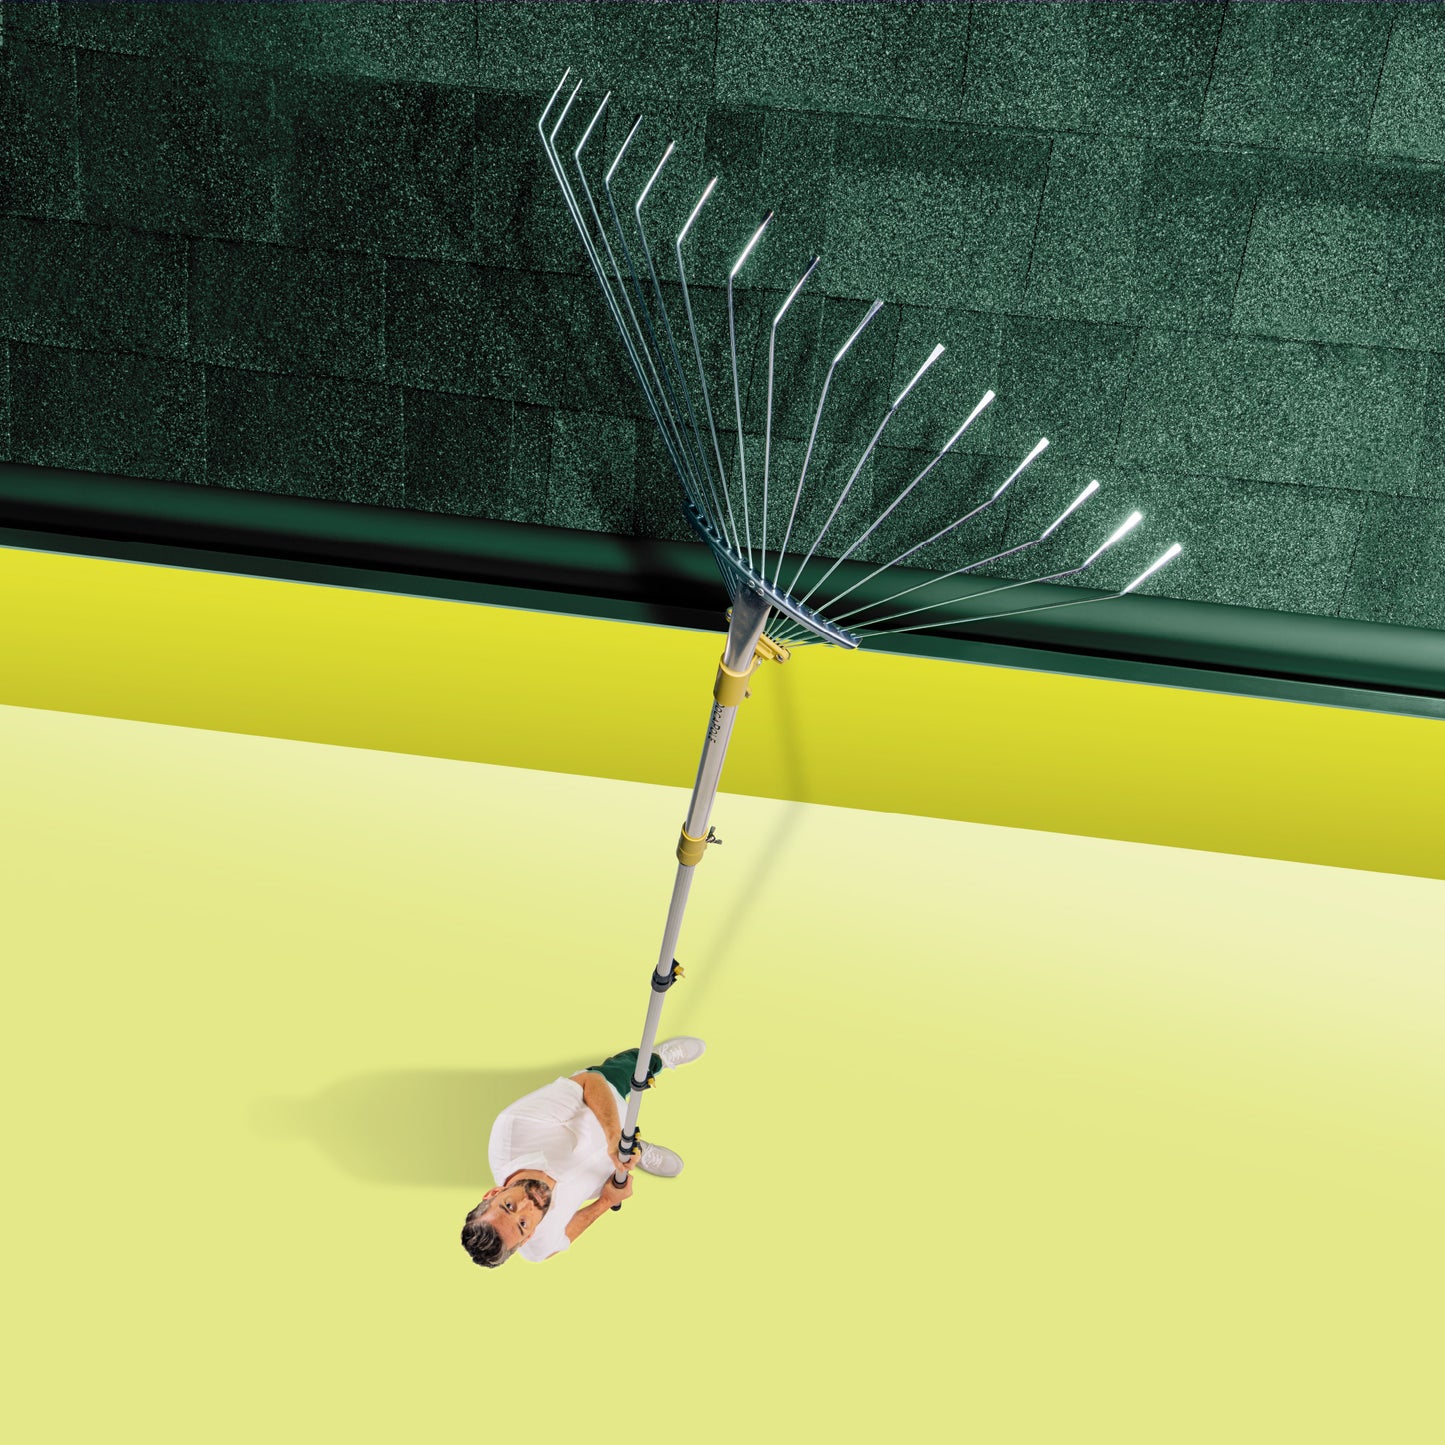 ROOF RAKE WITH 18’ OF REACH – Easily rake leaves, sticks, and debris off lower roof sections